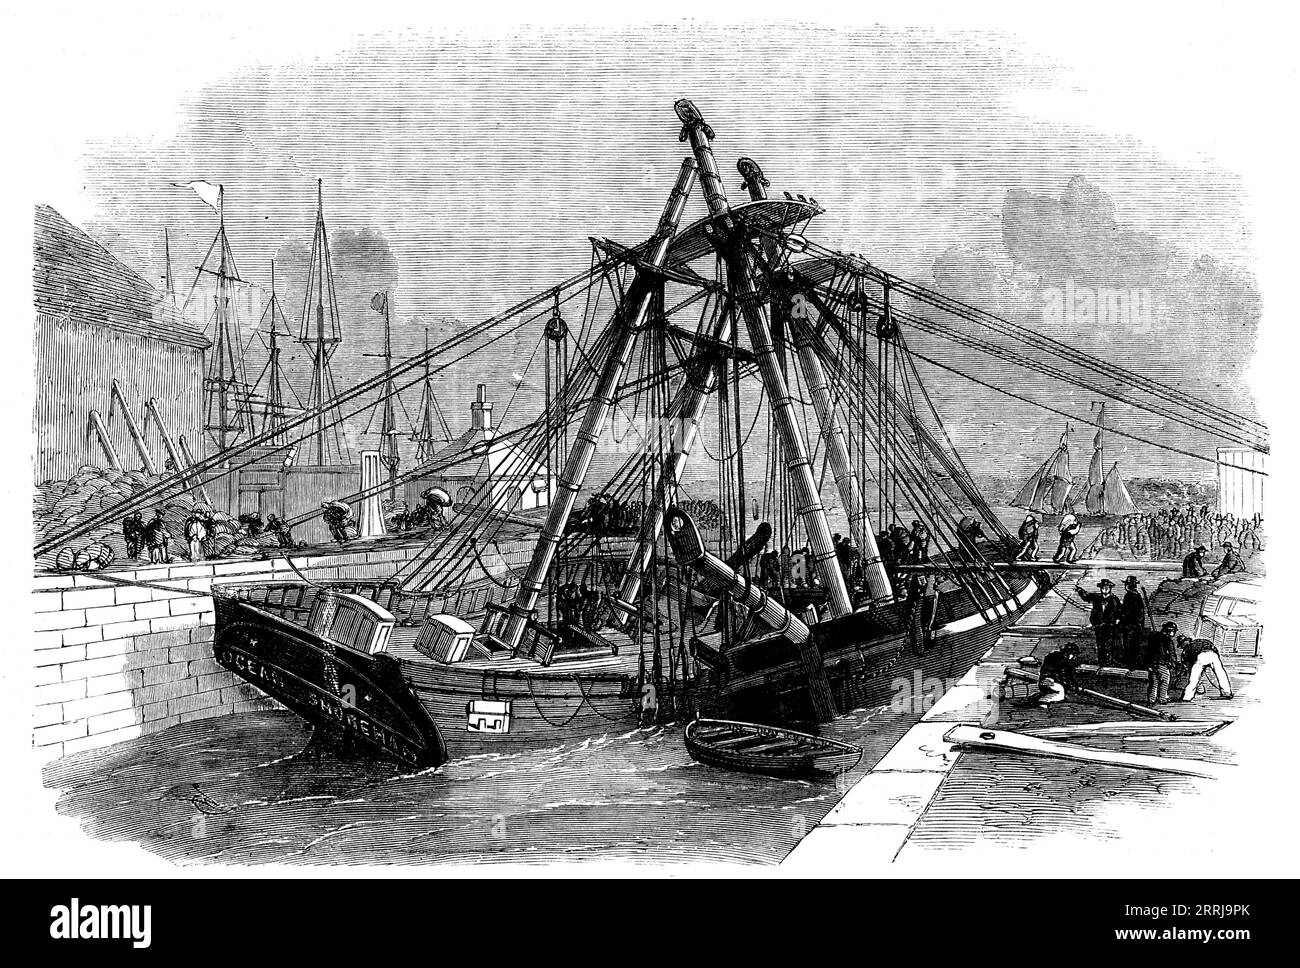 Accident at the Entry Lock of the East India Docks, Blackwall, [London], 1858. 'The vessels were the brig Ocean, of Shoreham, bound to Swansea, with a cargo of copper ore, and the collier brig Lustre, from South Shields, laden with coals. The Ocean had nearly got out of the lock when the Lustre came in from the river, and in progressing up the lock and passing the Ocean they became jammed. As the tide receded the position of the ships became most critical. The collier, with her heavy cargo of coals, careened over on to the starboard side of the Ocean, crushing her bulwarks and beams. The work Stock Photo